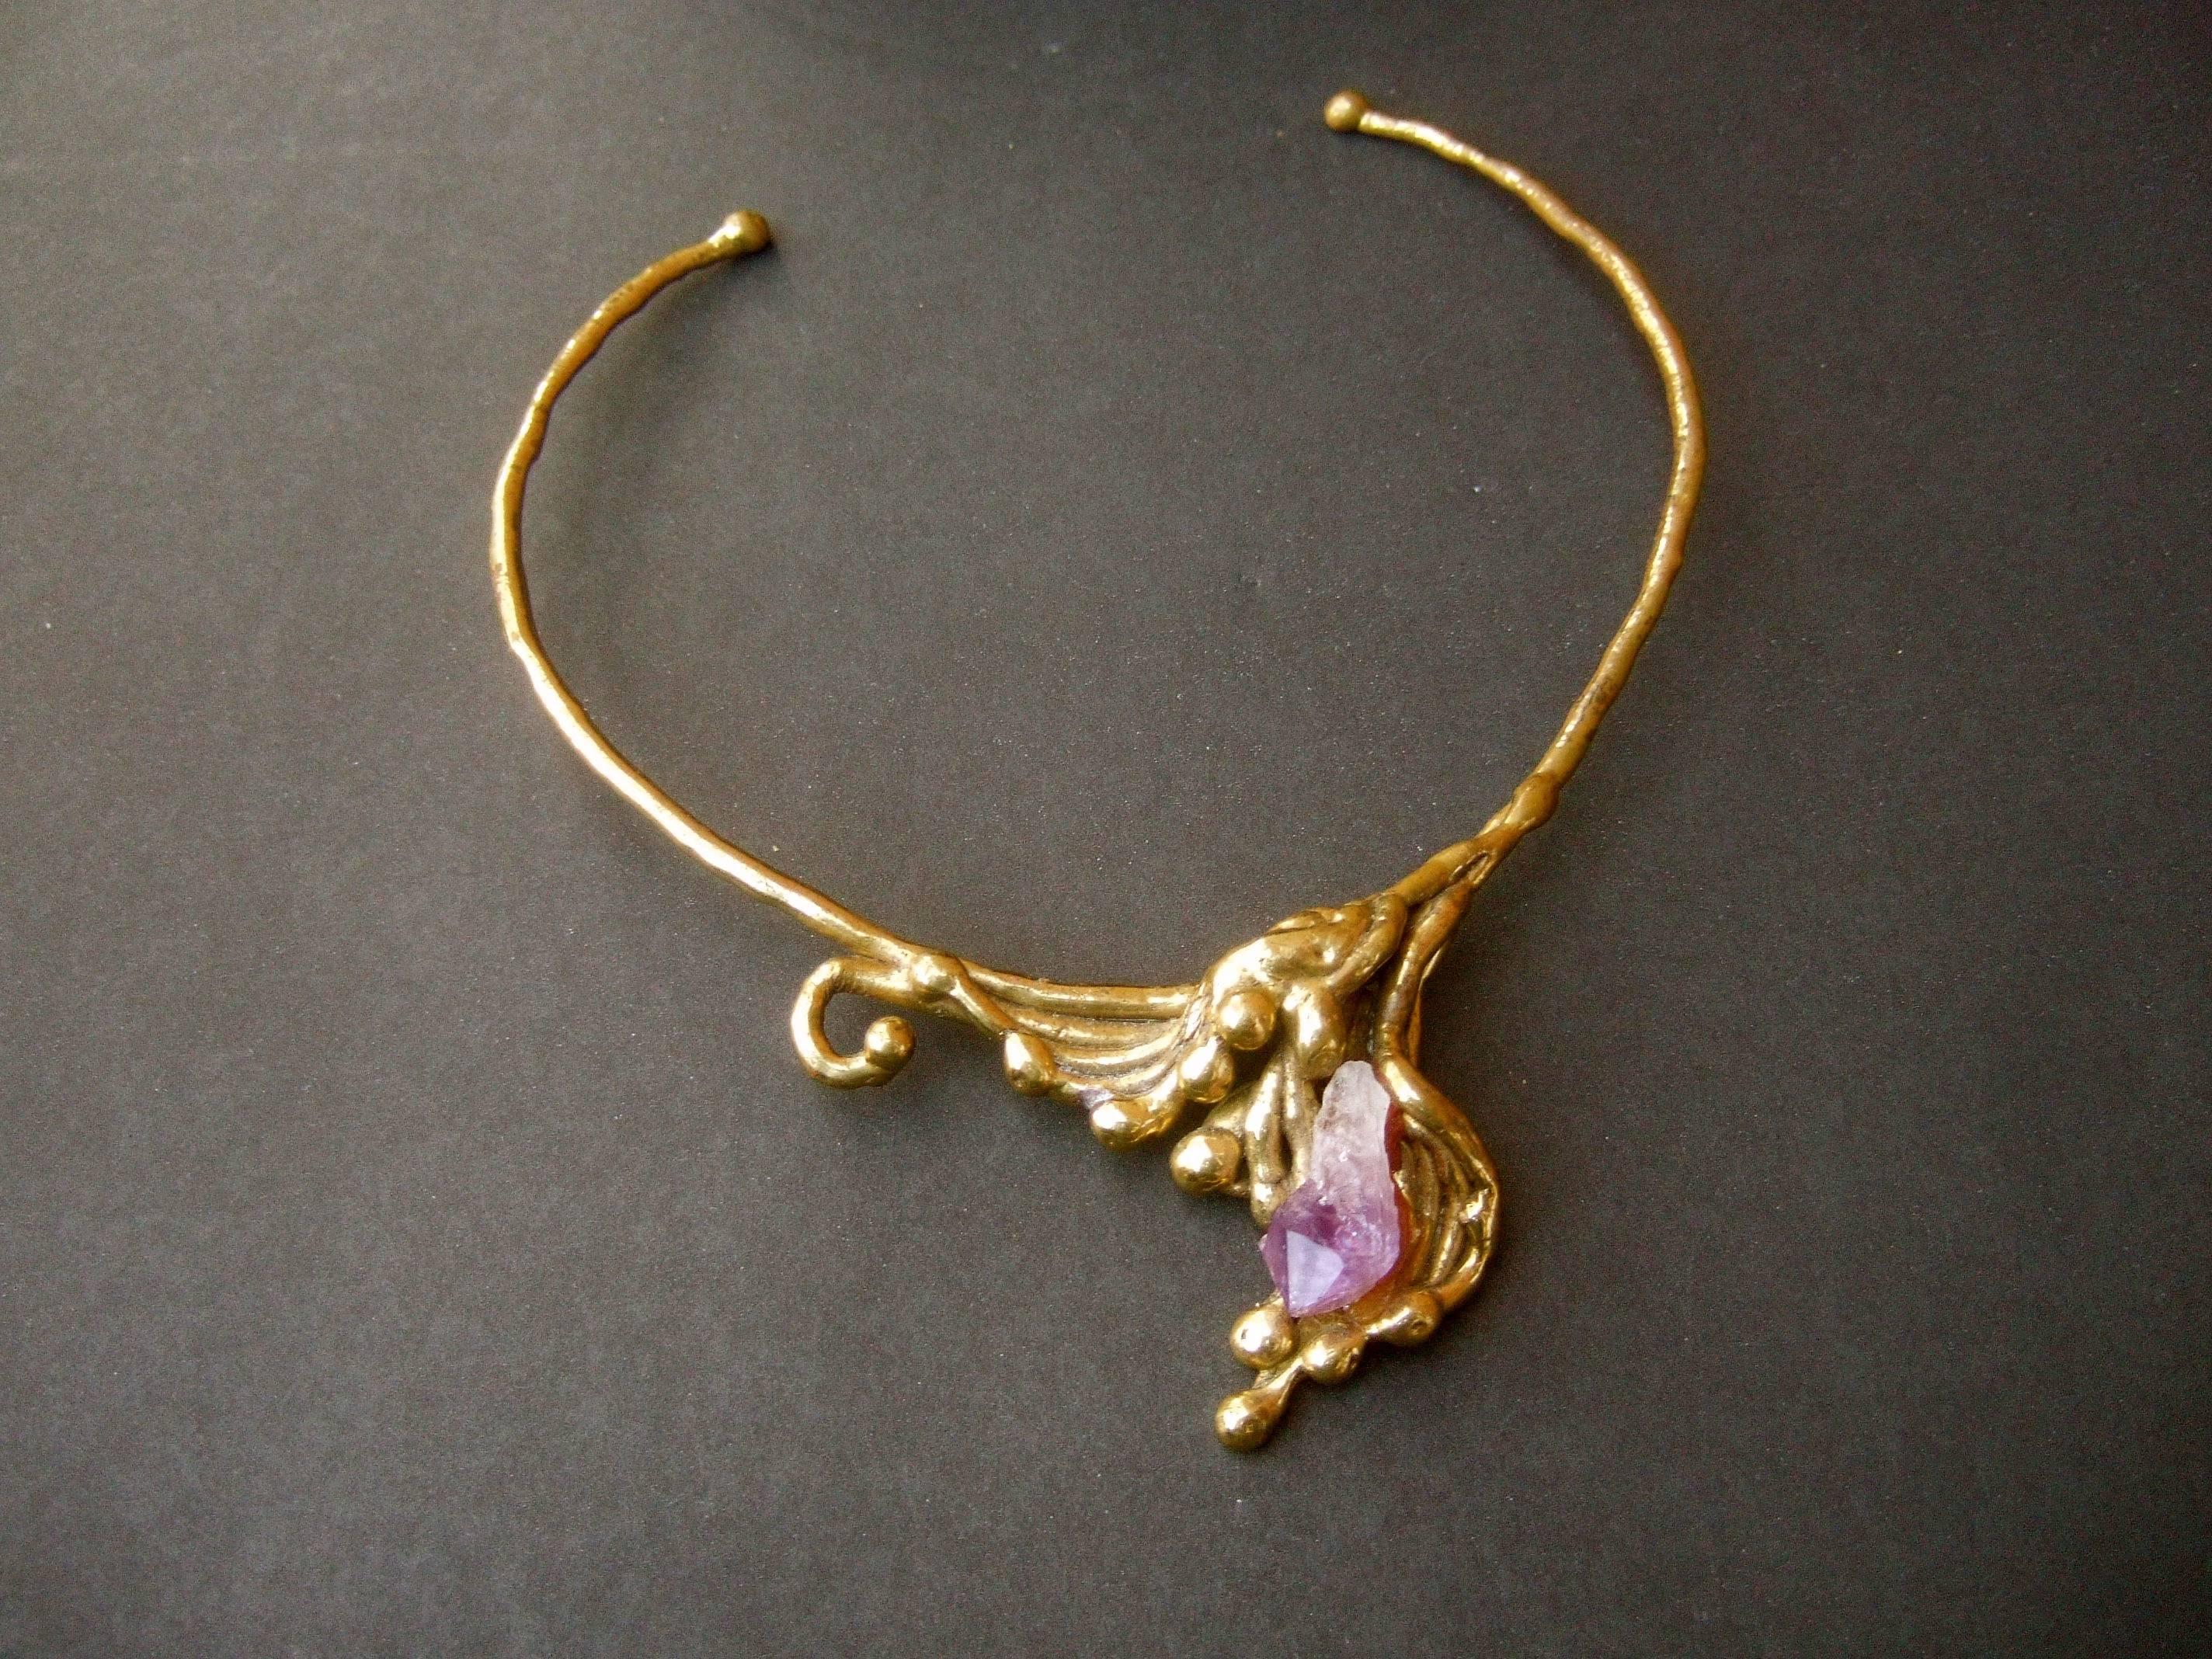 Amethyst brass metal artisan choker necklace c 1970s
The unique handmade choker necklace is designed 
with a rigid brass metal curved band

The center is embellished with a jagged amethyst stone 
encased in sinuous brass metal bands 

Makes a very